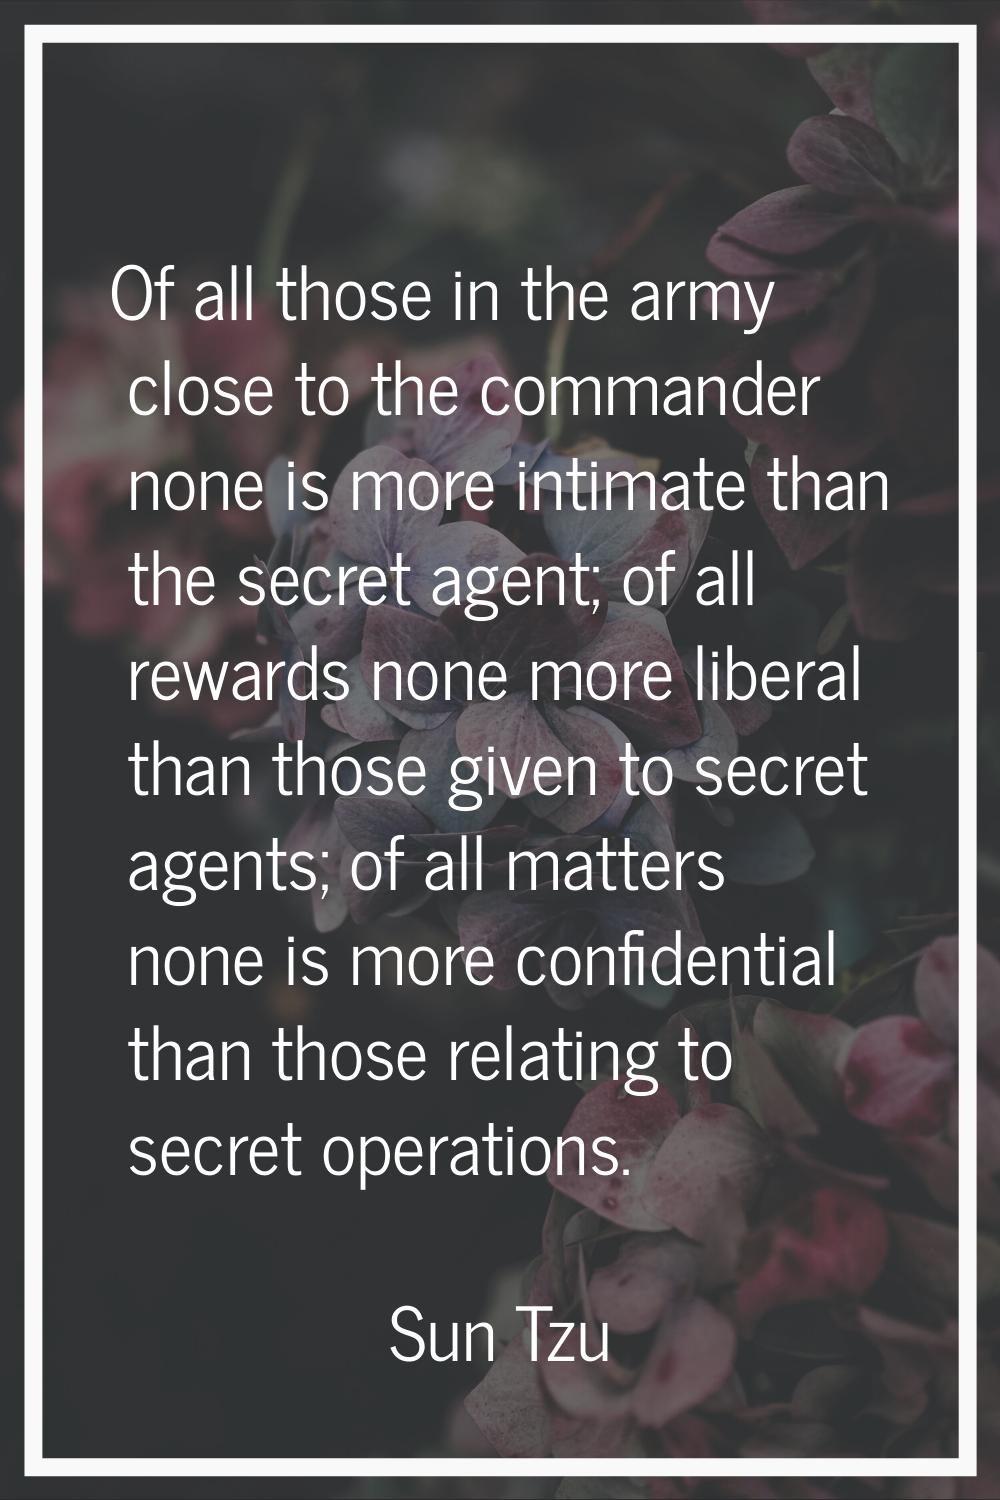 Of all those in the army close to the commander none is more intimate than the secret agent; of all